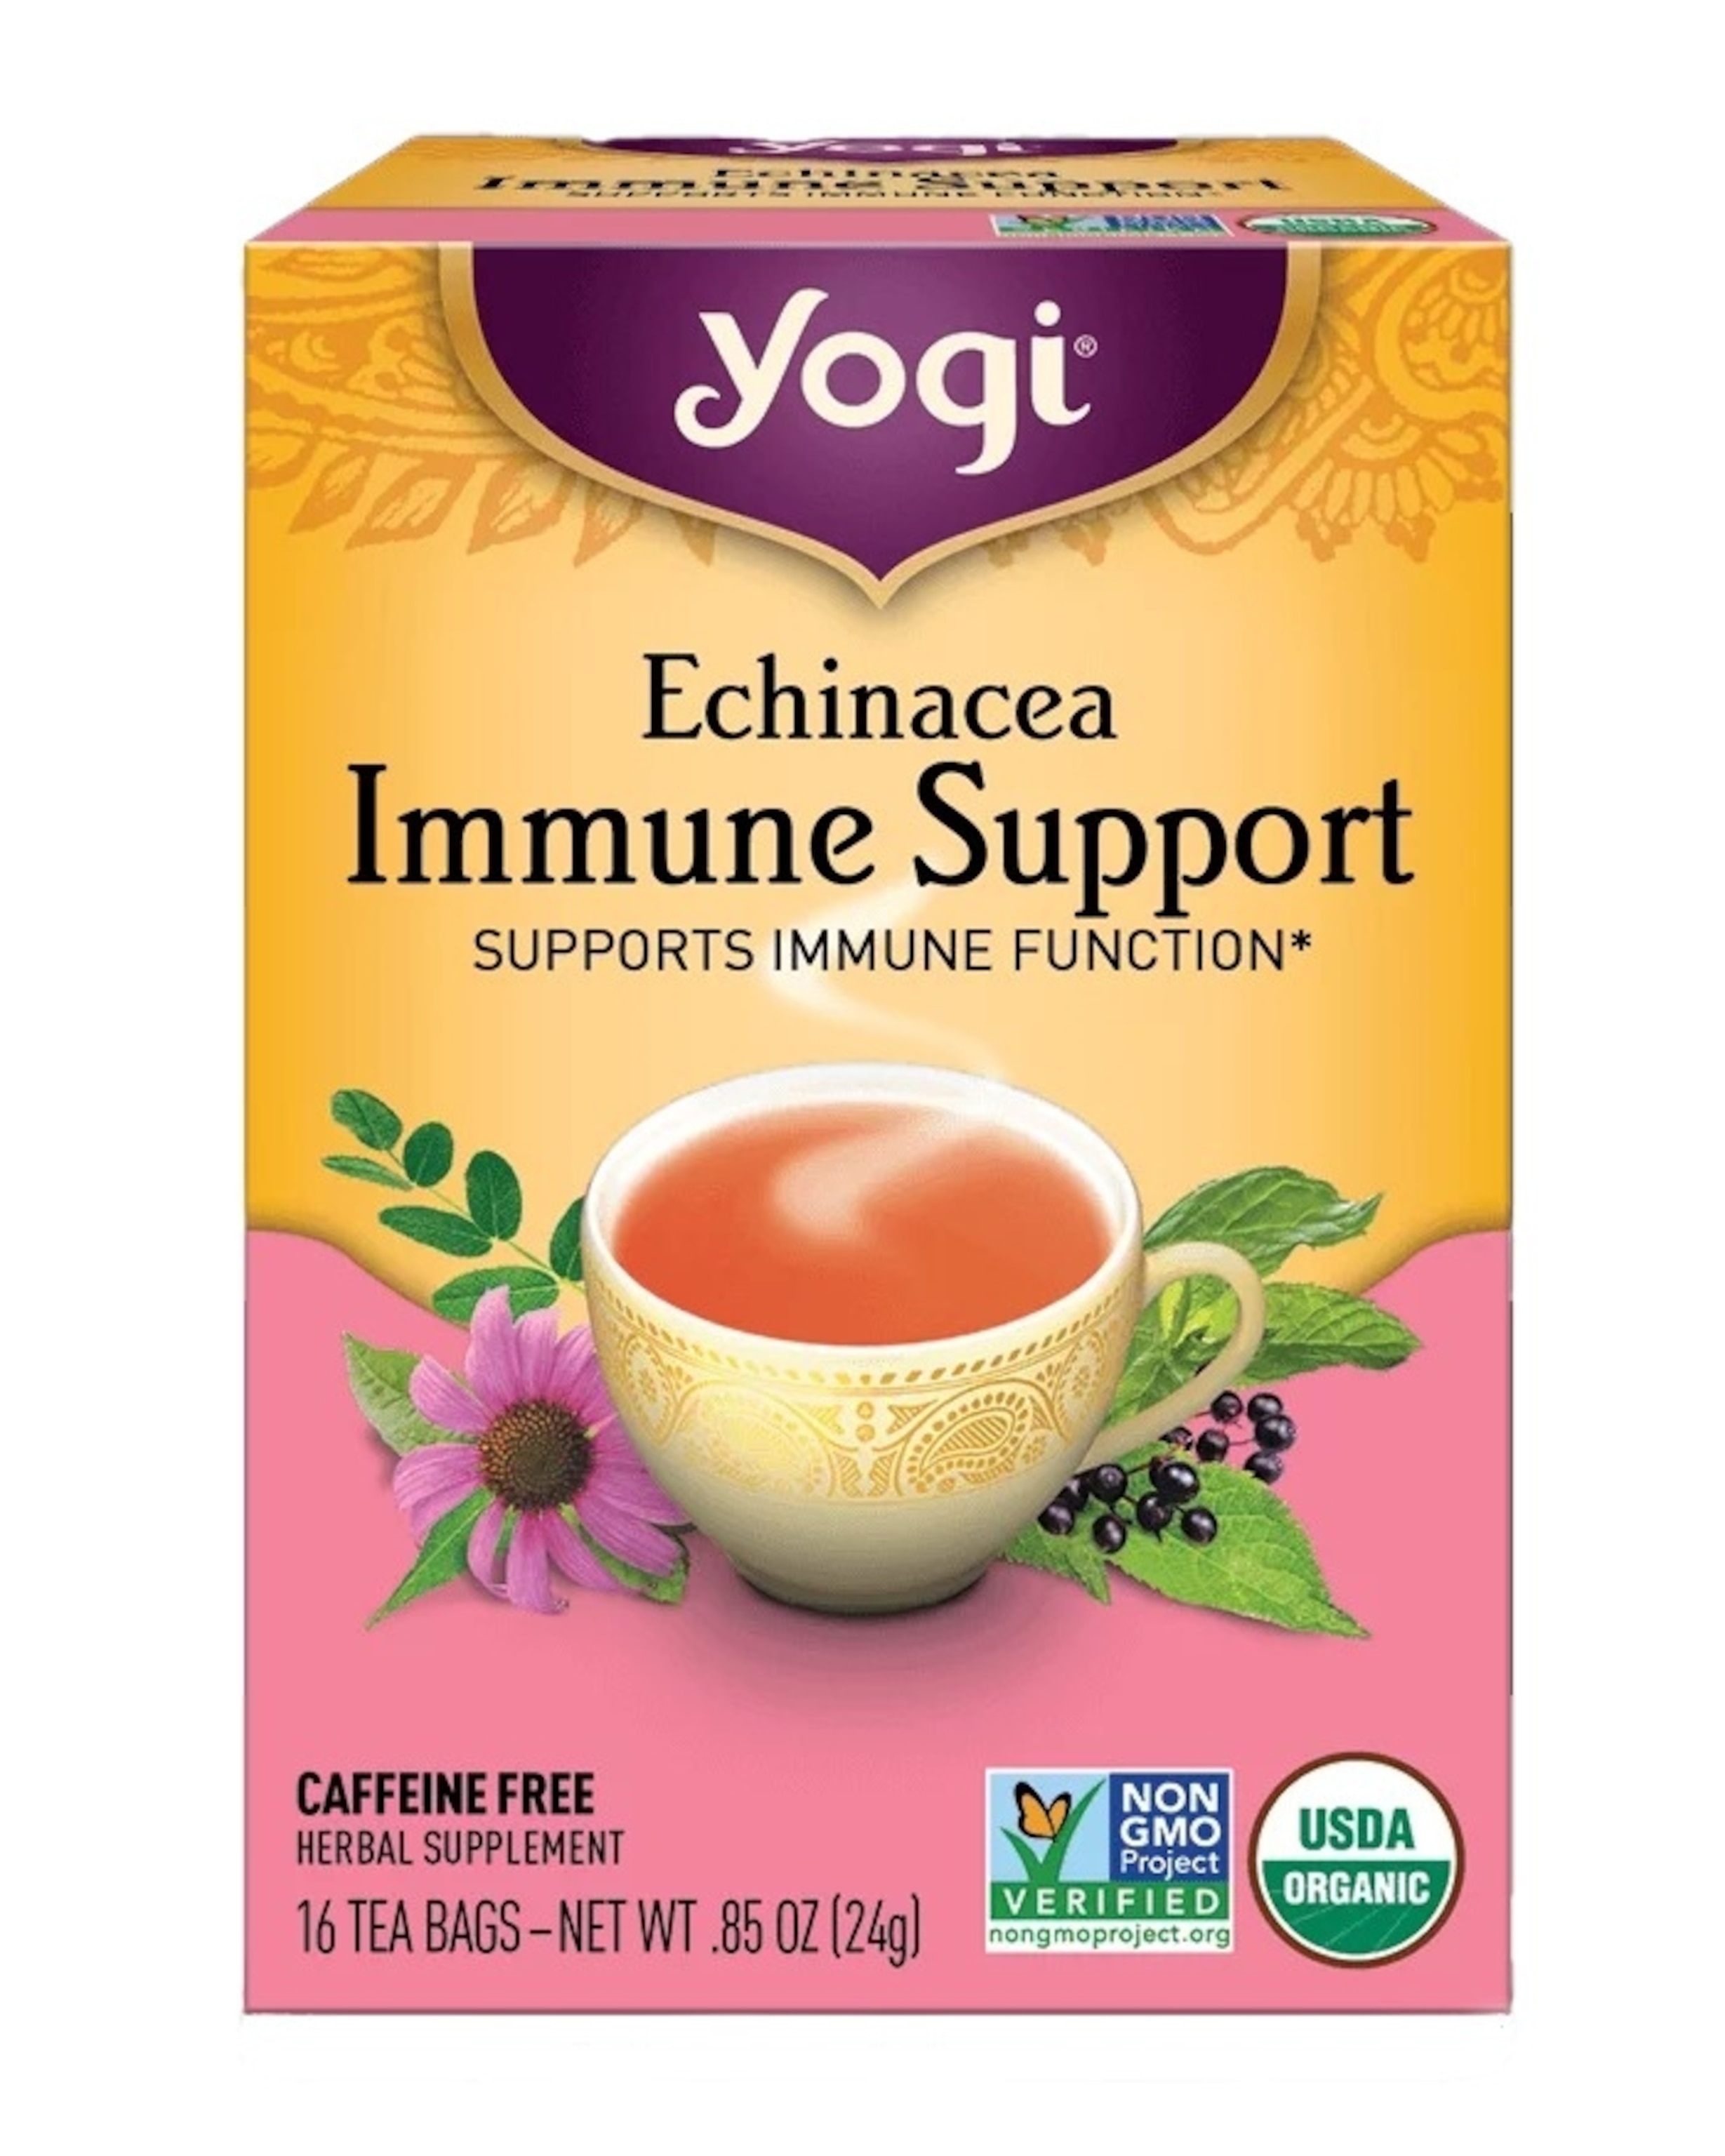 PHOTO: Organic Yogi Echinacea Immune Support product is recalled because pesticide residues were detected above action levels.